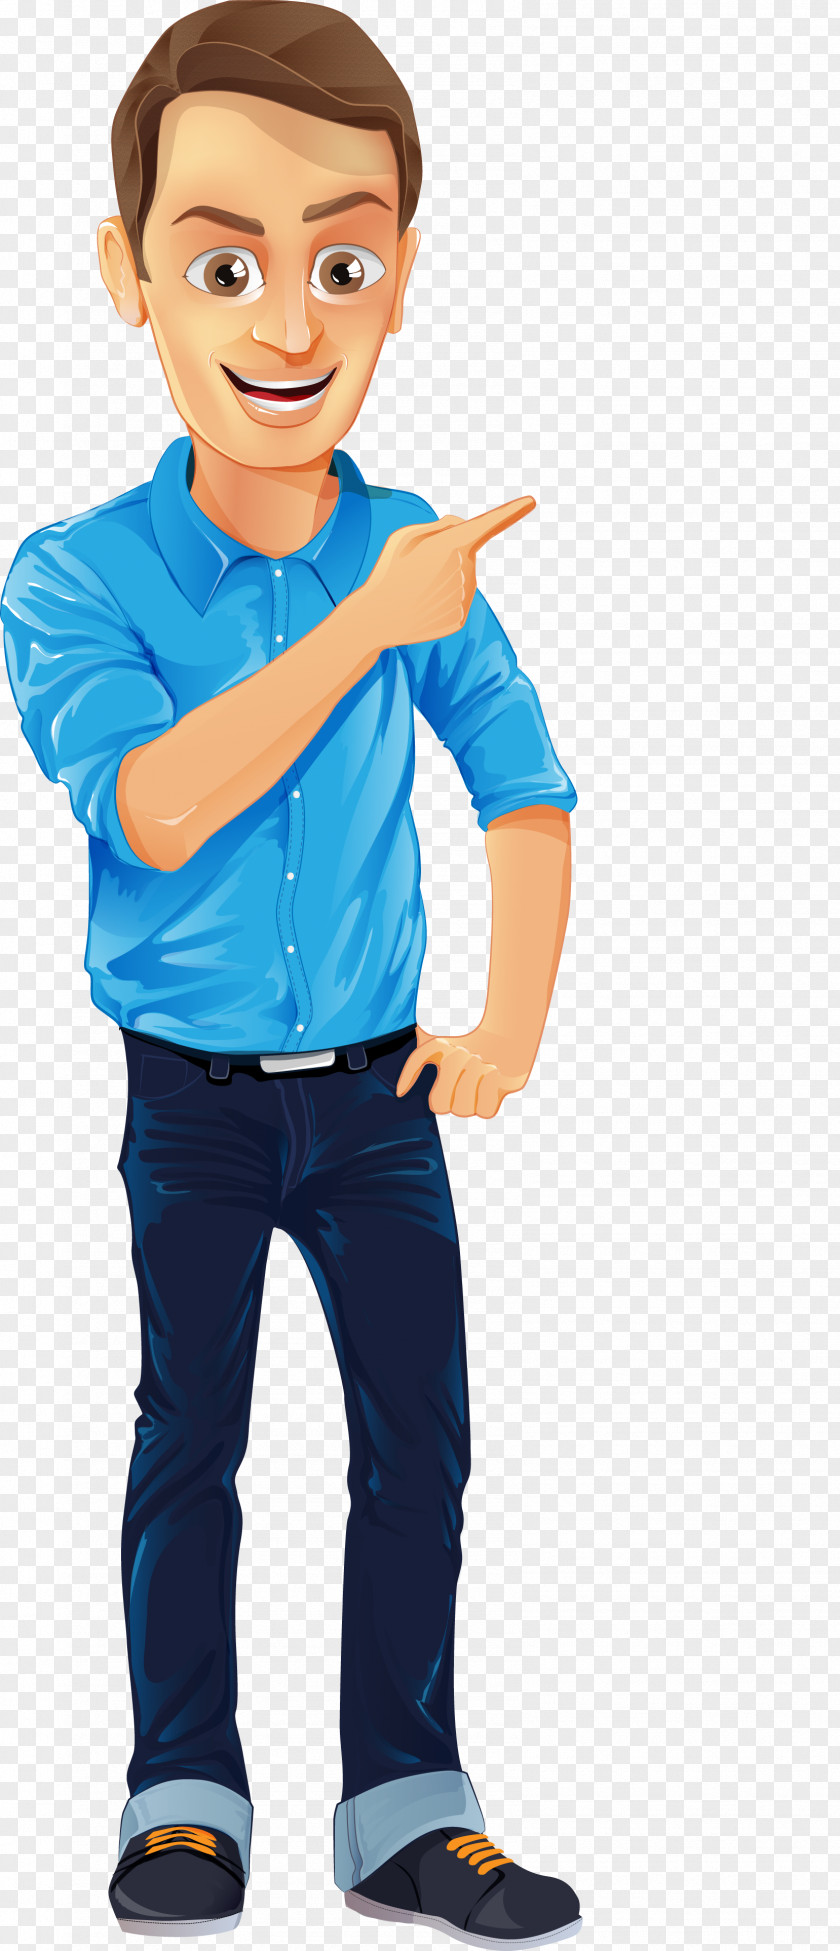 Businessman Male Character Cartoon PNG